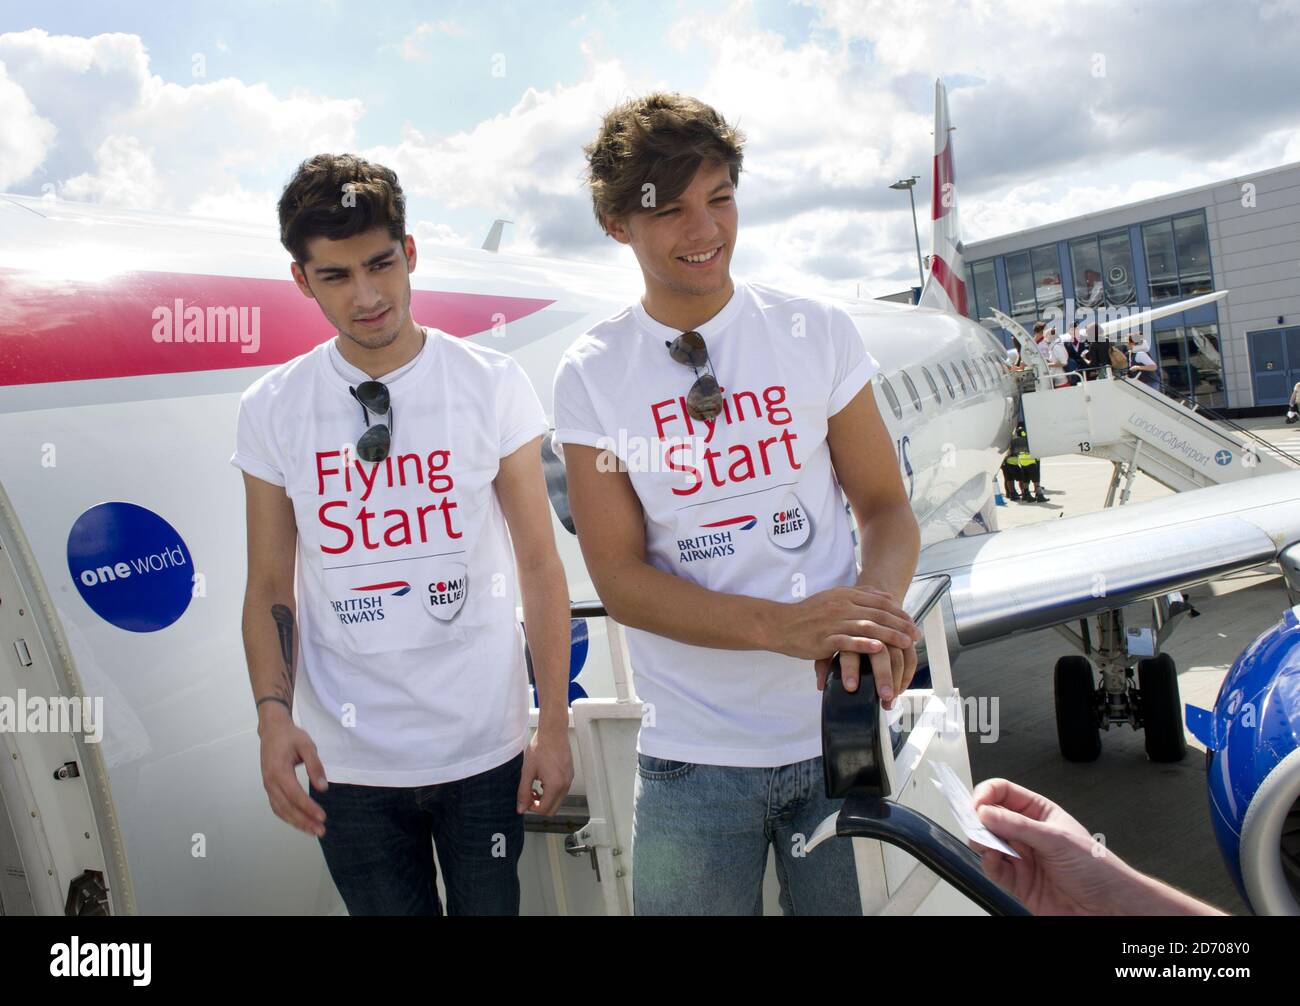 Zayn Malik L And Louis Tomlinson Of One Direction Pictured On Board Flight Ba1d A Private Charter Flight From London To Manchester Hosted By The Band For Competition Winners Which Raised